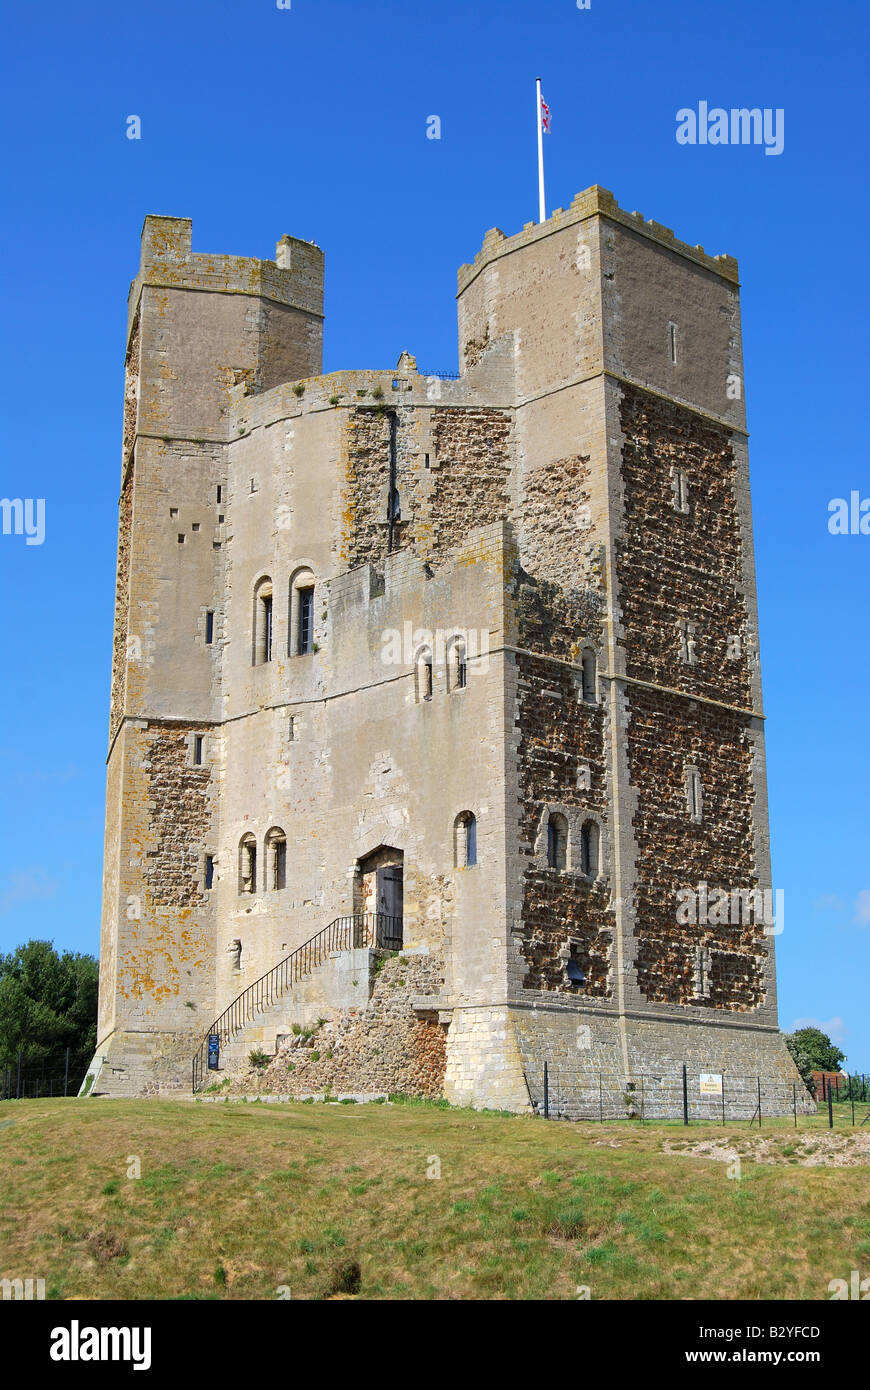 Le donjon du château d'Orford, Orford, Suffolk, Angleterre, Royaume-Uni Banque D'Images